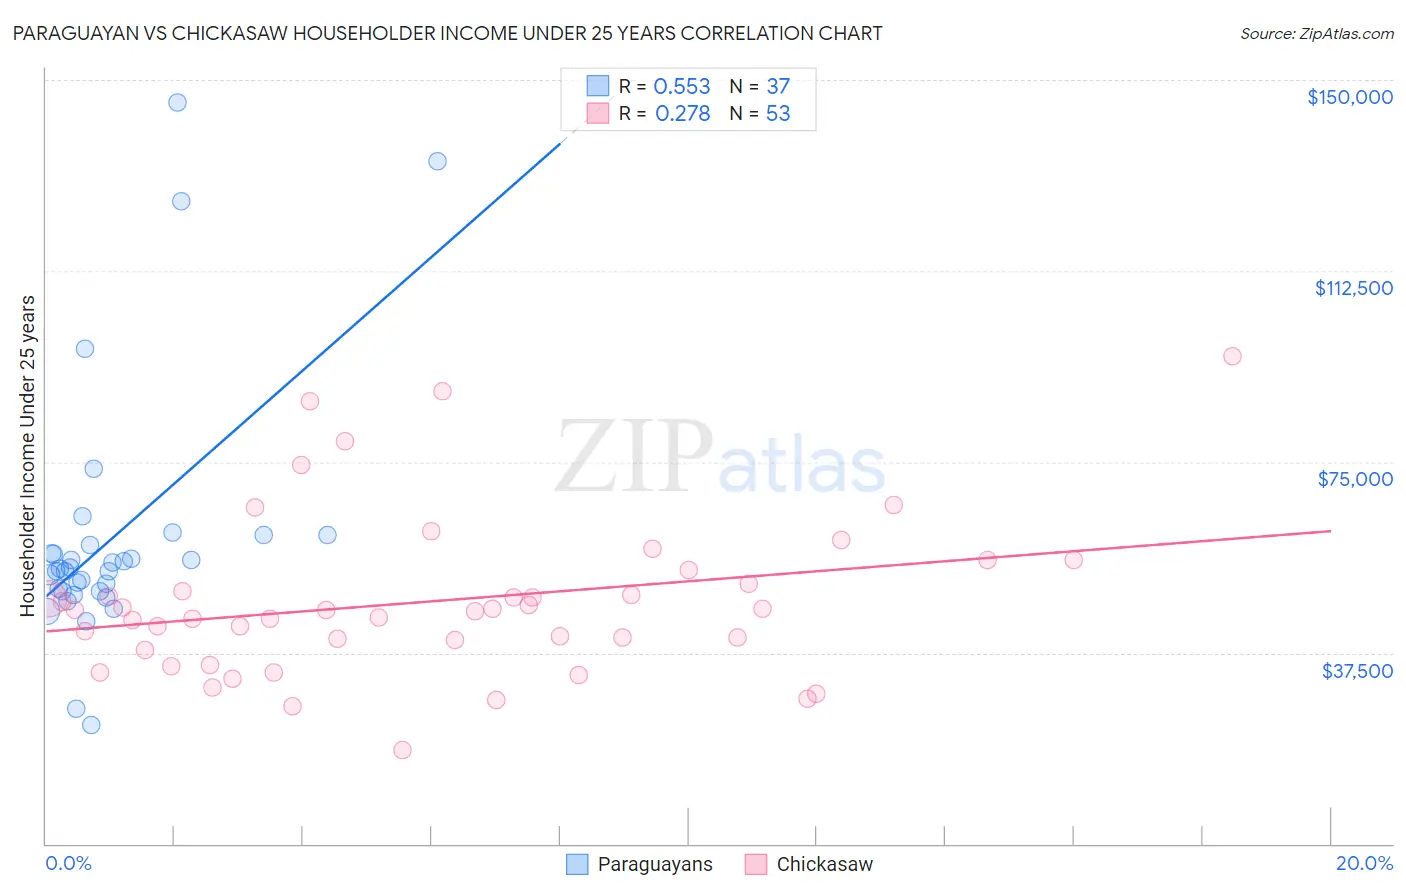 Paraguayan vs Chickasaw Householder Income Under 25 years